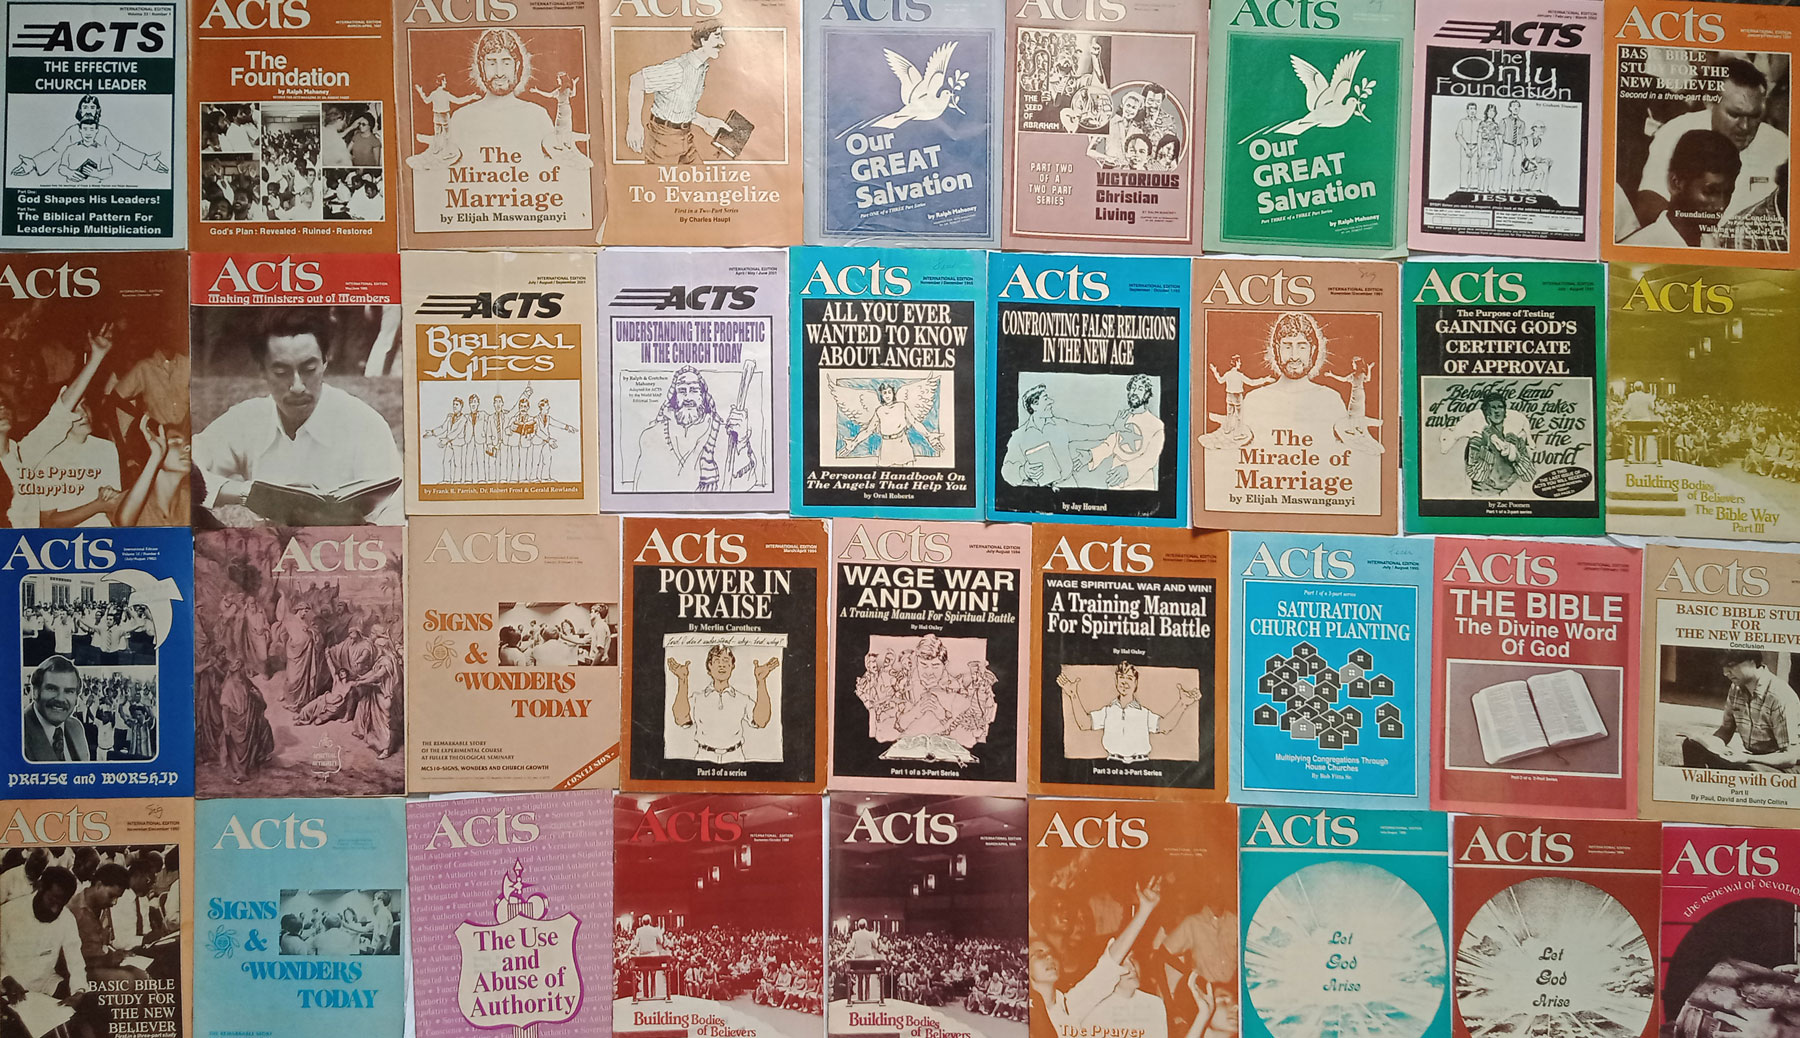 Acts Magazines from 1980's and 1990's